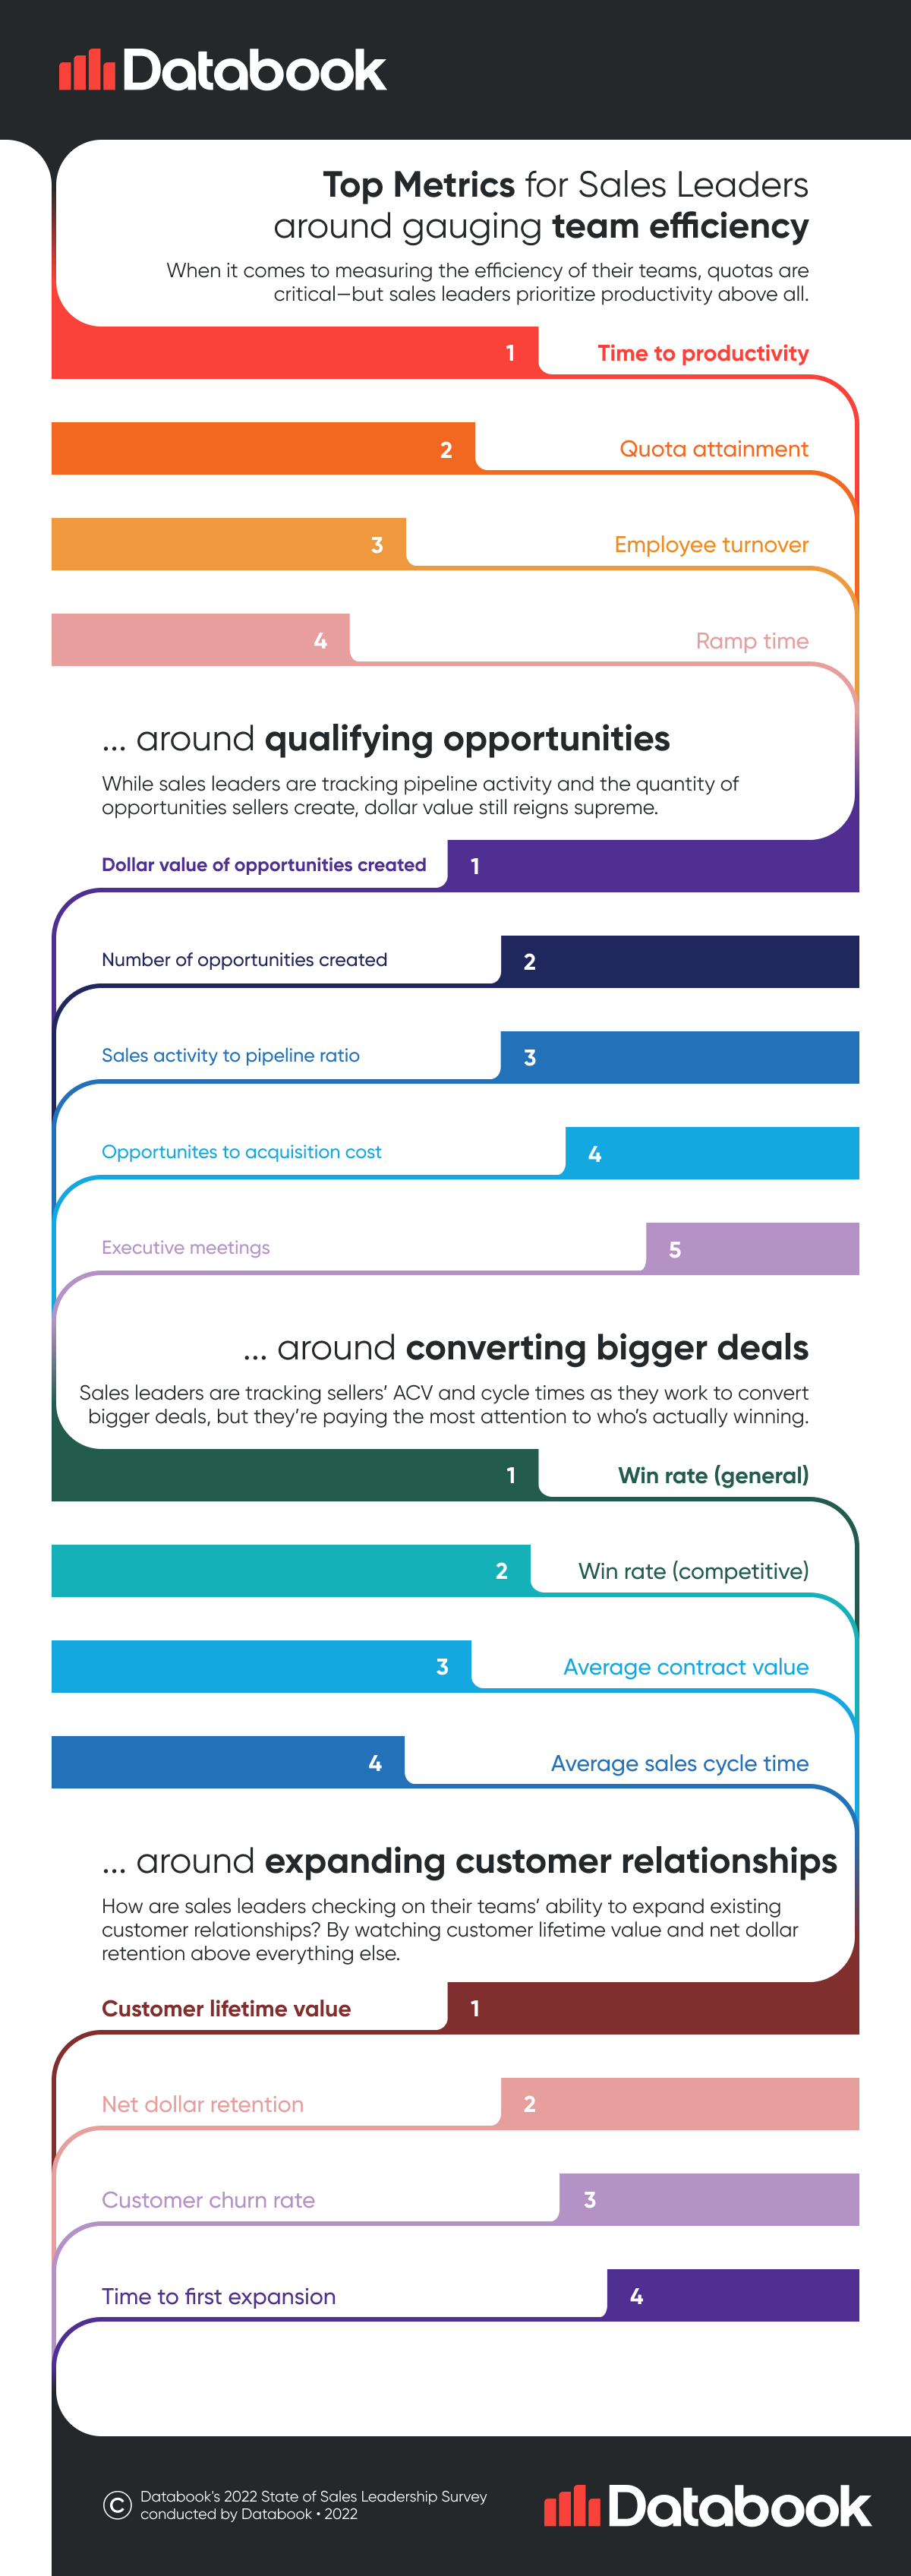 infographic featuring sales leadership metrics from a survey of 300+ sales leaders | databookogsite.wpengine.com